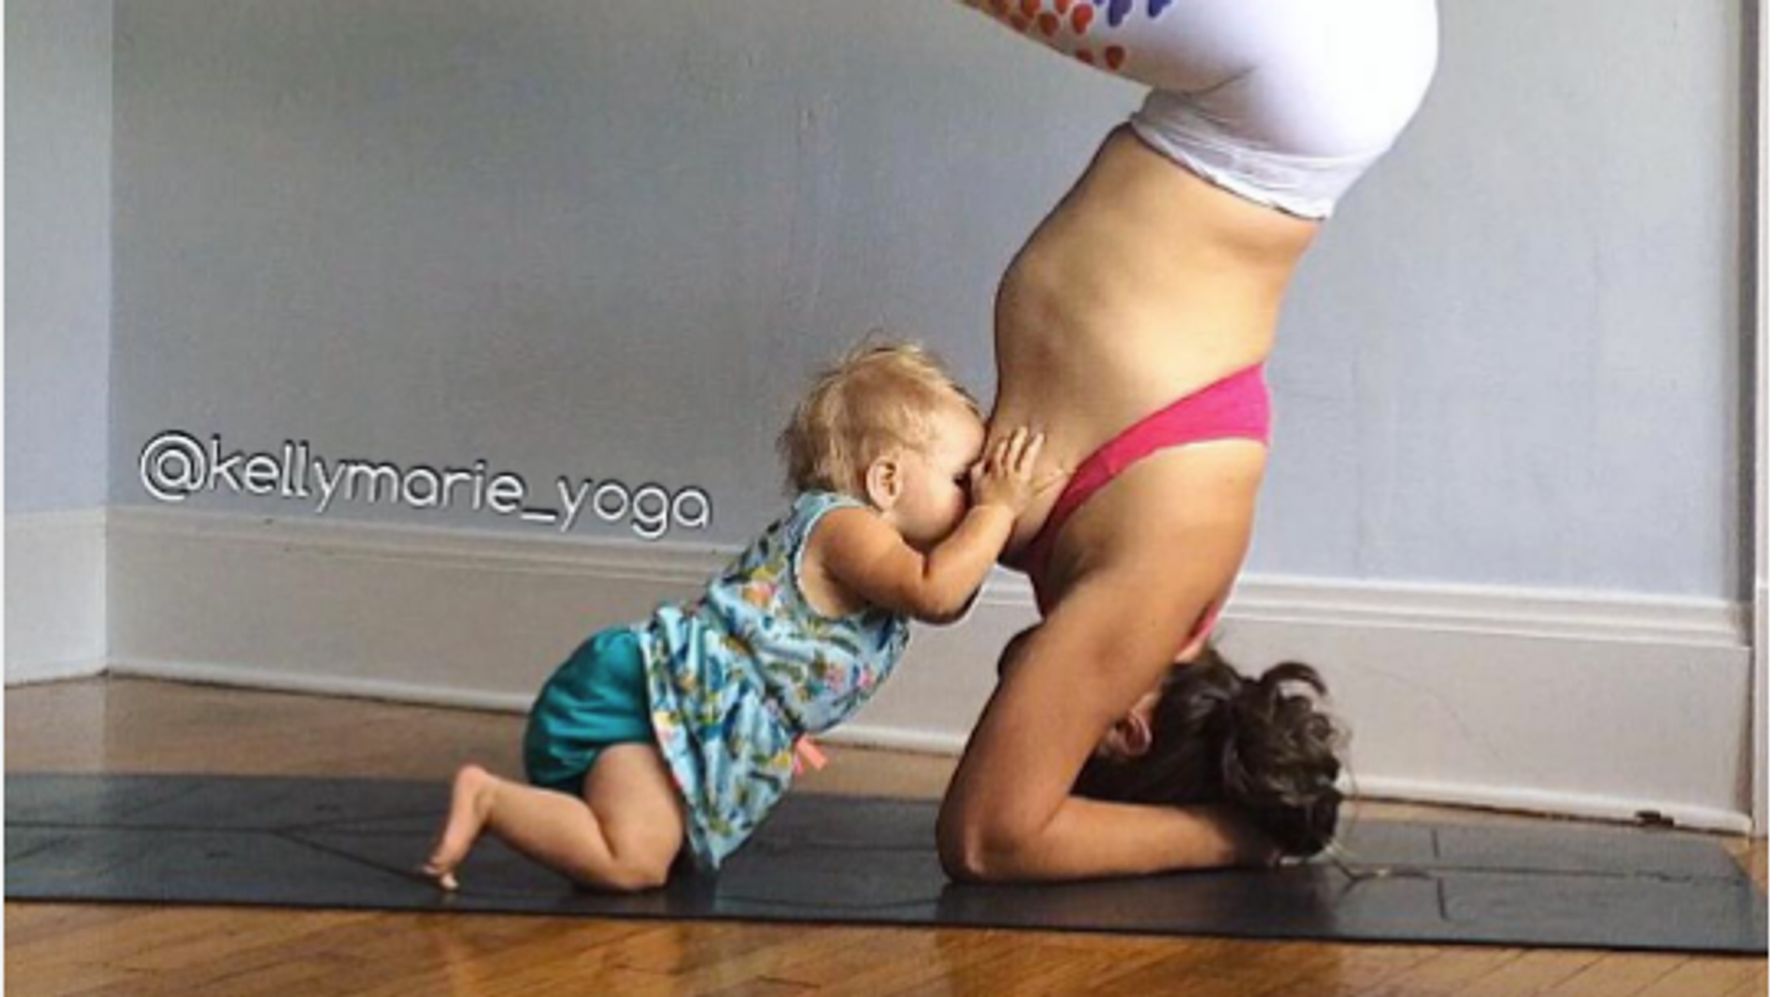 Mom Defends Right To Breastfeed In Public With Epic Yoga Photo